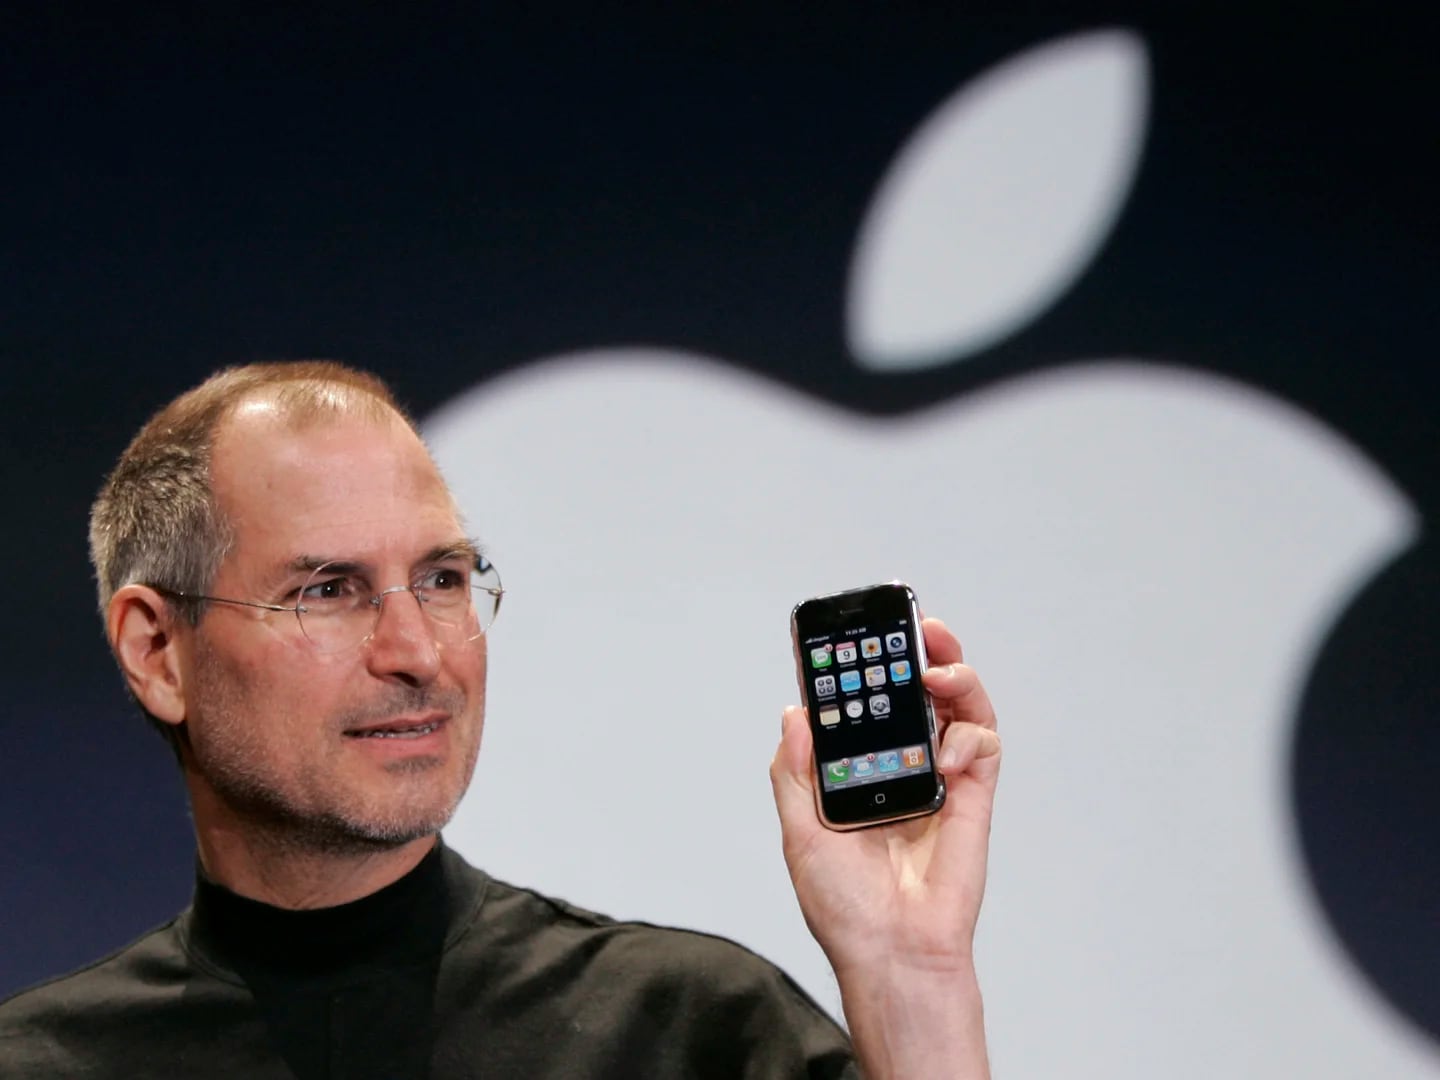 Steve Jobs used his language focused on each person being able to understand him